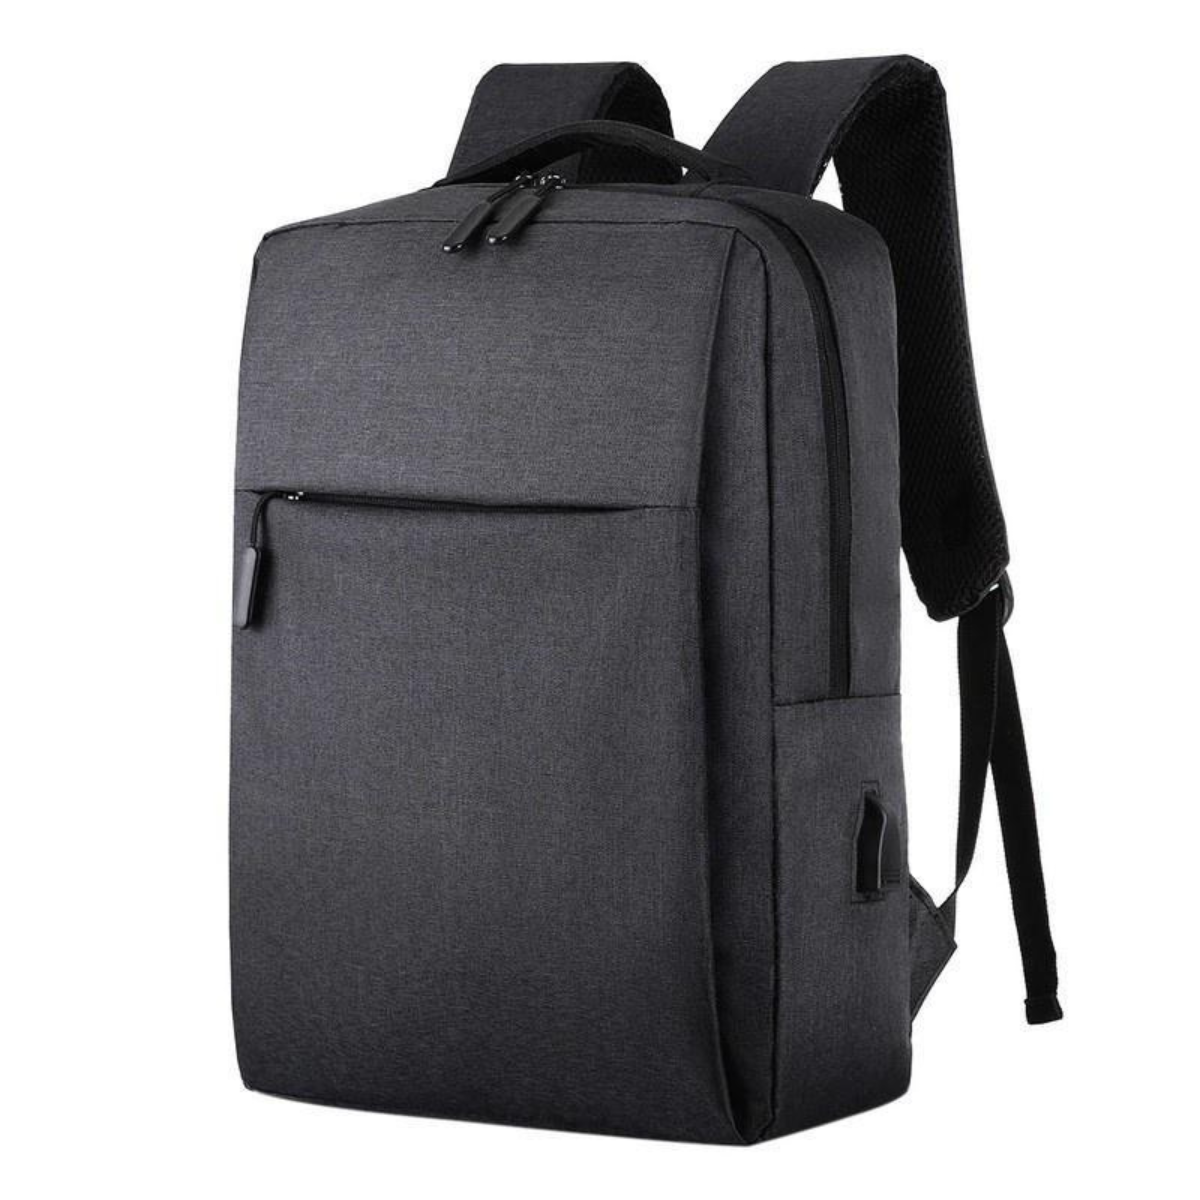 Anti Theft Laptop Backpack, 15.6 inch, USB Charging, Male Travel